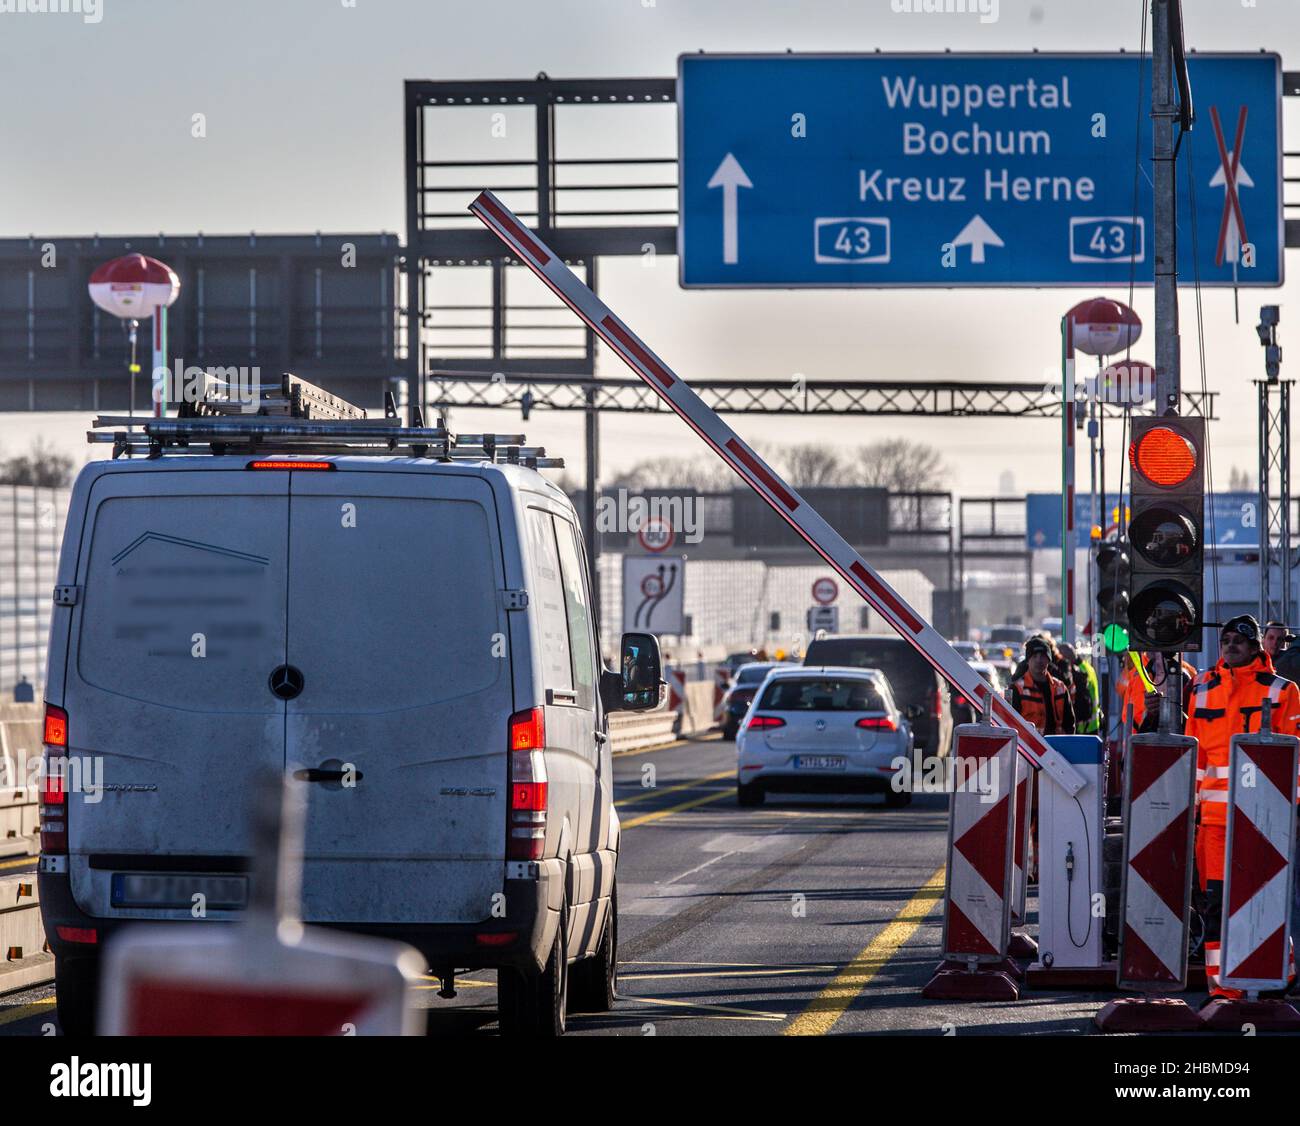 Recklinghausen, Germany. 20th Dec, 2021. A van stands at the new barrier on the 43 in the direction of Wuppertal. Because of bridge damage to a section of the Emschertal Bridge over the Rhine-Herne Canal near Herne, no vehicles heavier than 3.5 tonnes are allowed to drive on the section of the motorway between Herne and Recklinghausen. Because too many do not comply with the ban, a barrier system is now being installed. Credit: Dieter Menne/dpa/Alamy Live News Stock Photo